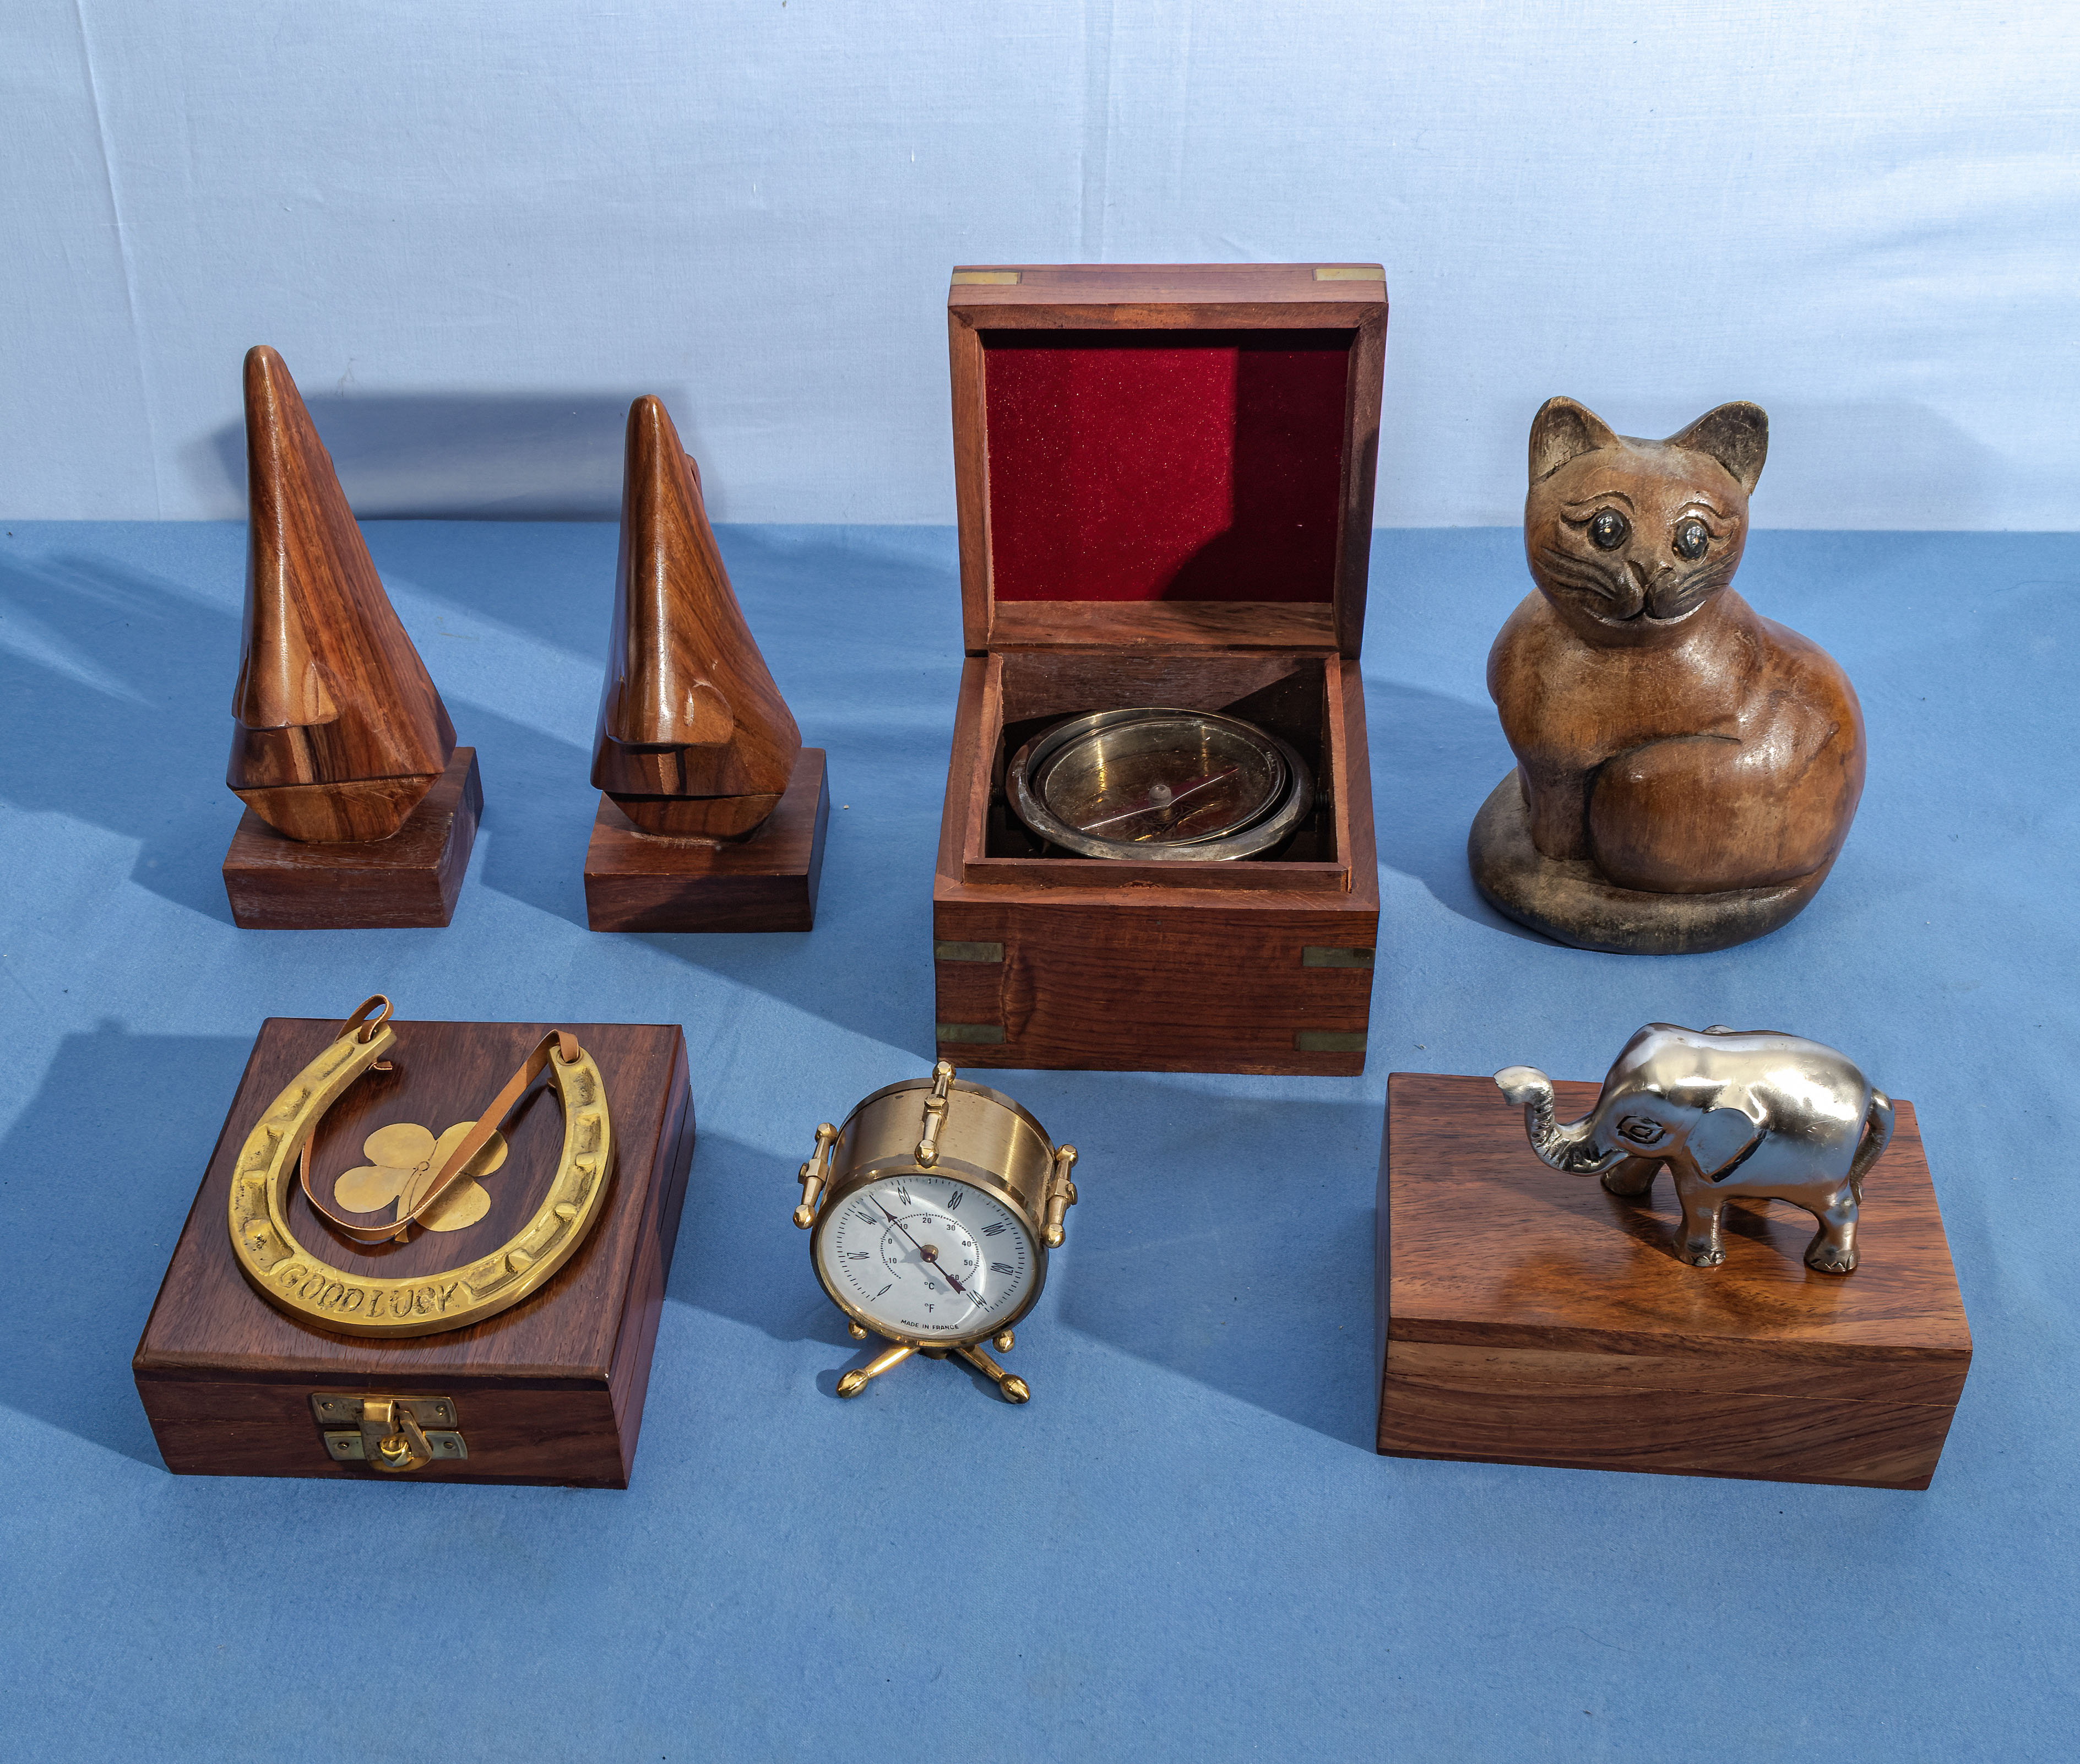 Compass in wooden box and other wood items